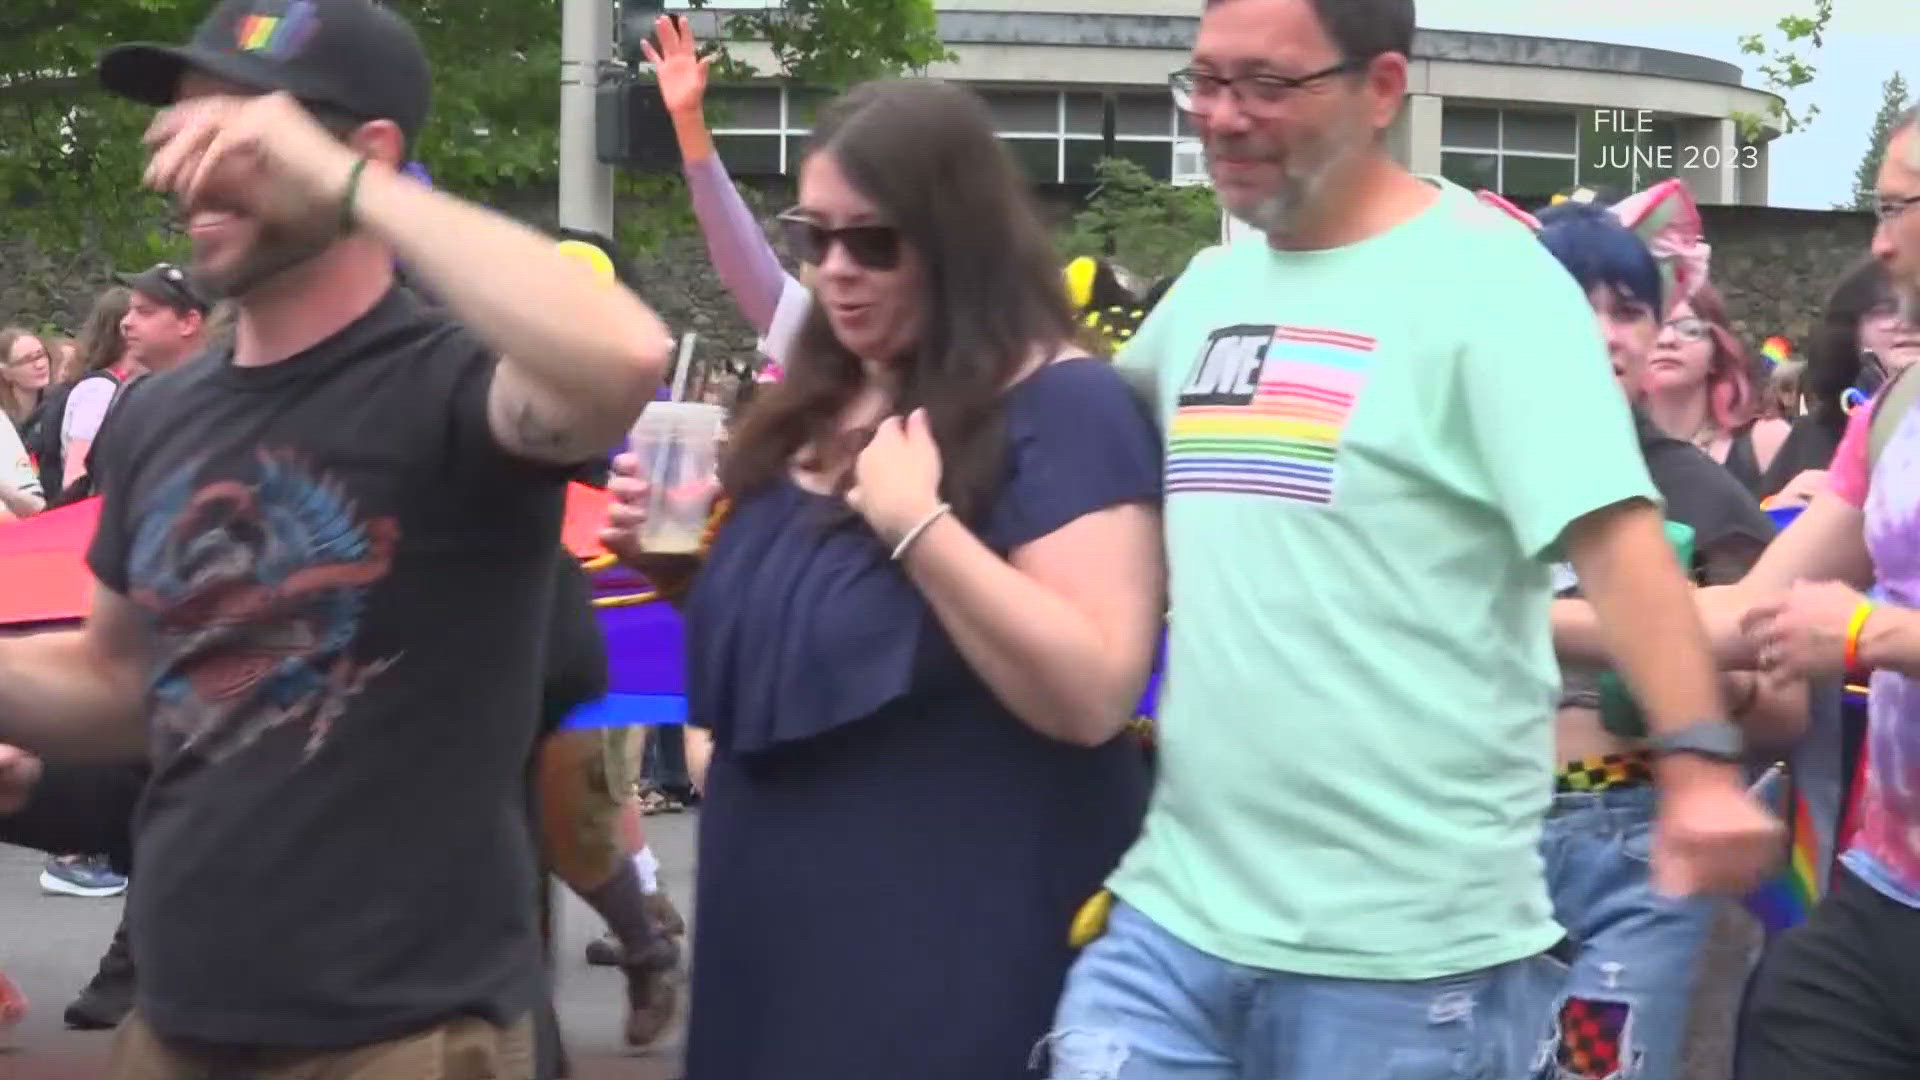 Here is what you need to know before Spokane Pride's celebration on Saturday, June 8.